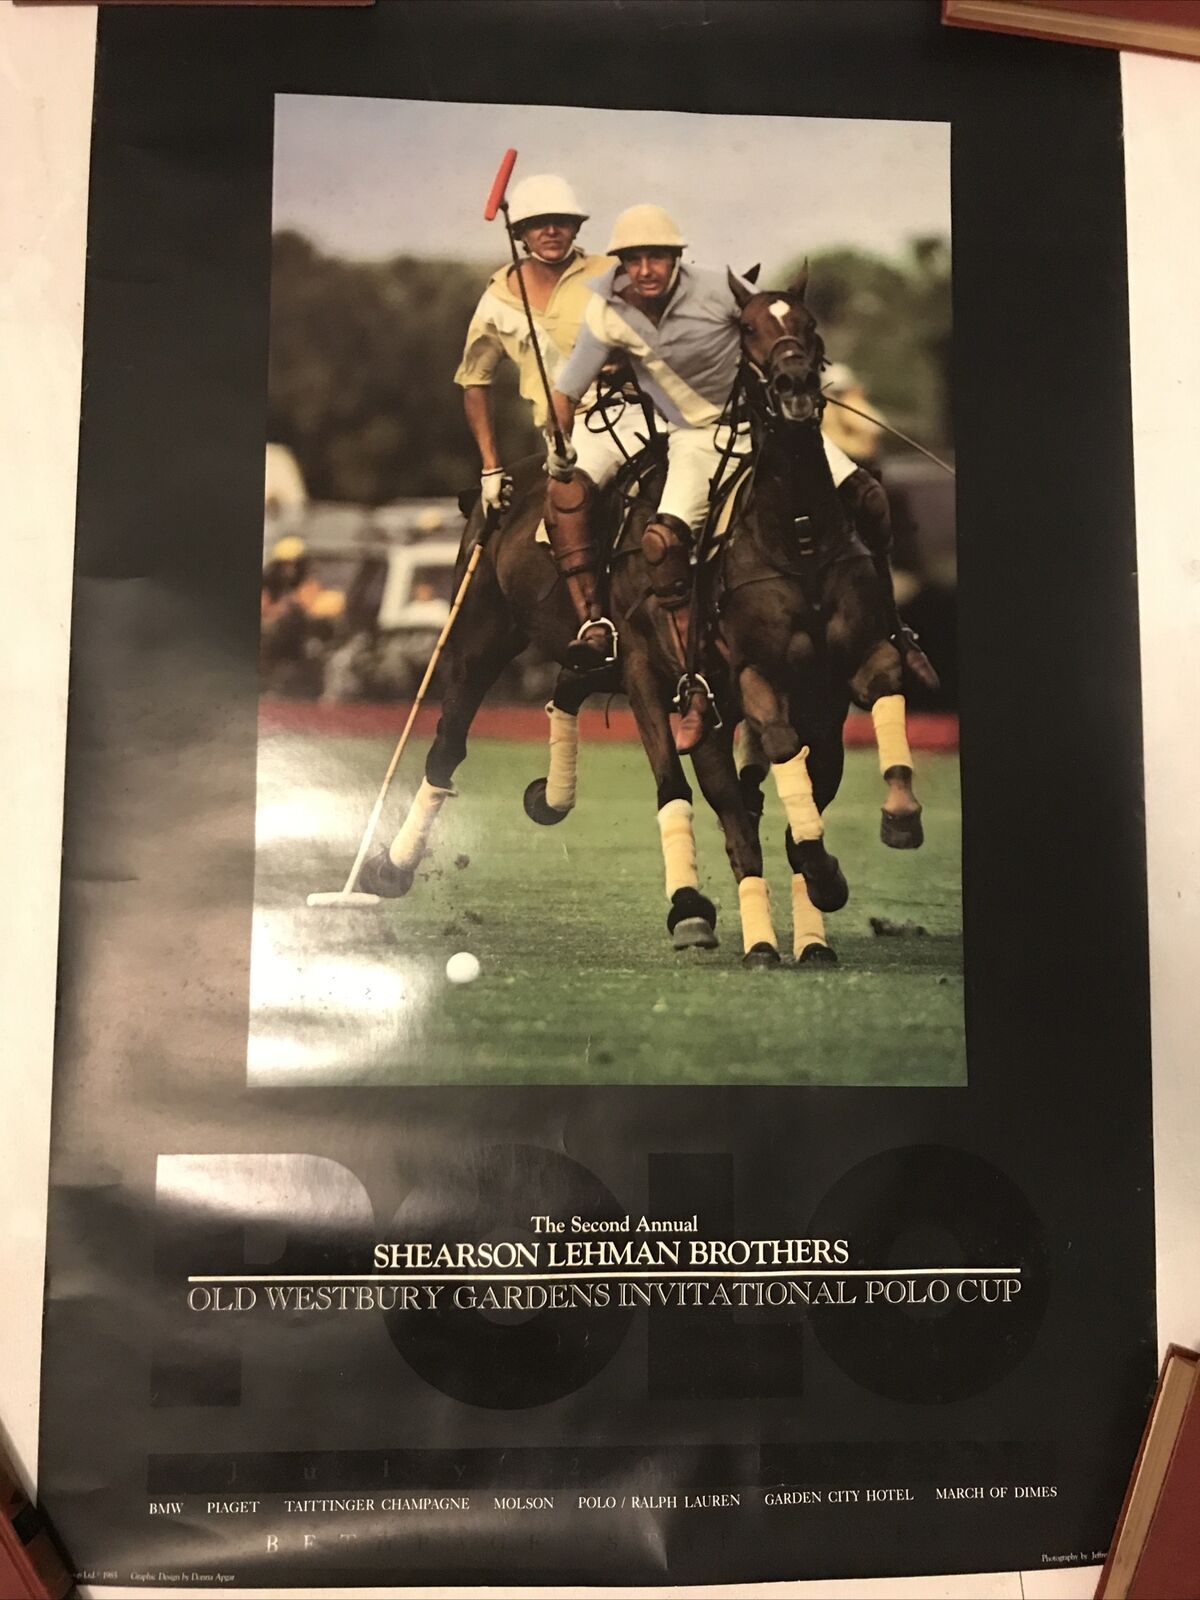 Shearson Lehman Brothers 2nd Annual Polo Cup Poster 1985  Photojeffrey Blackman